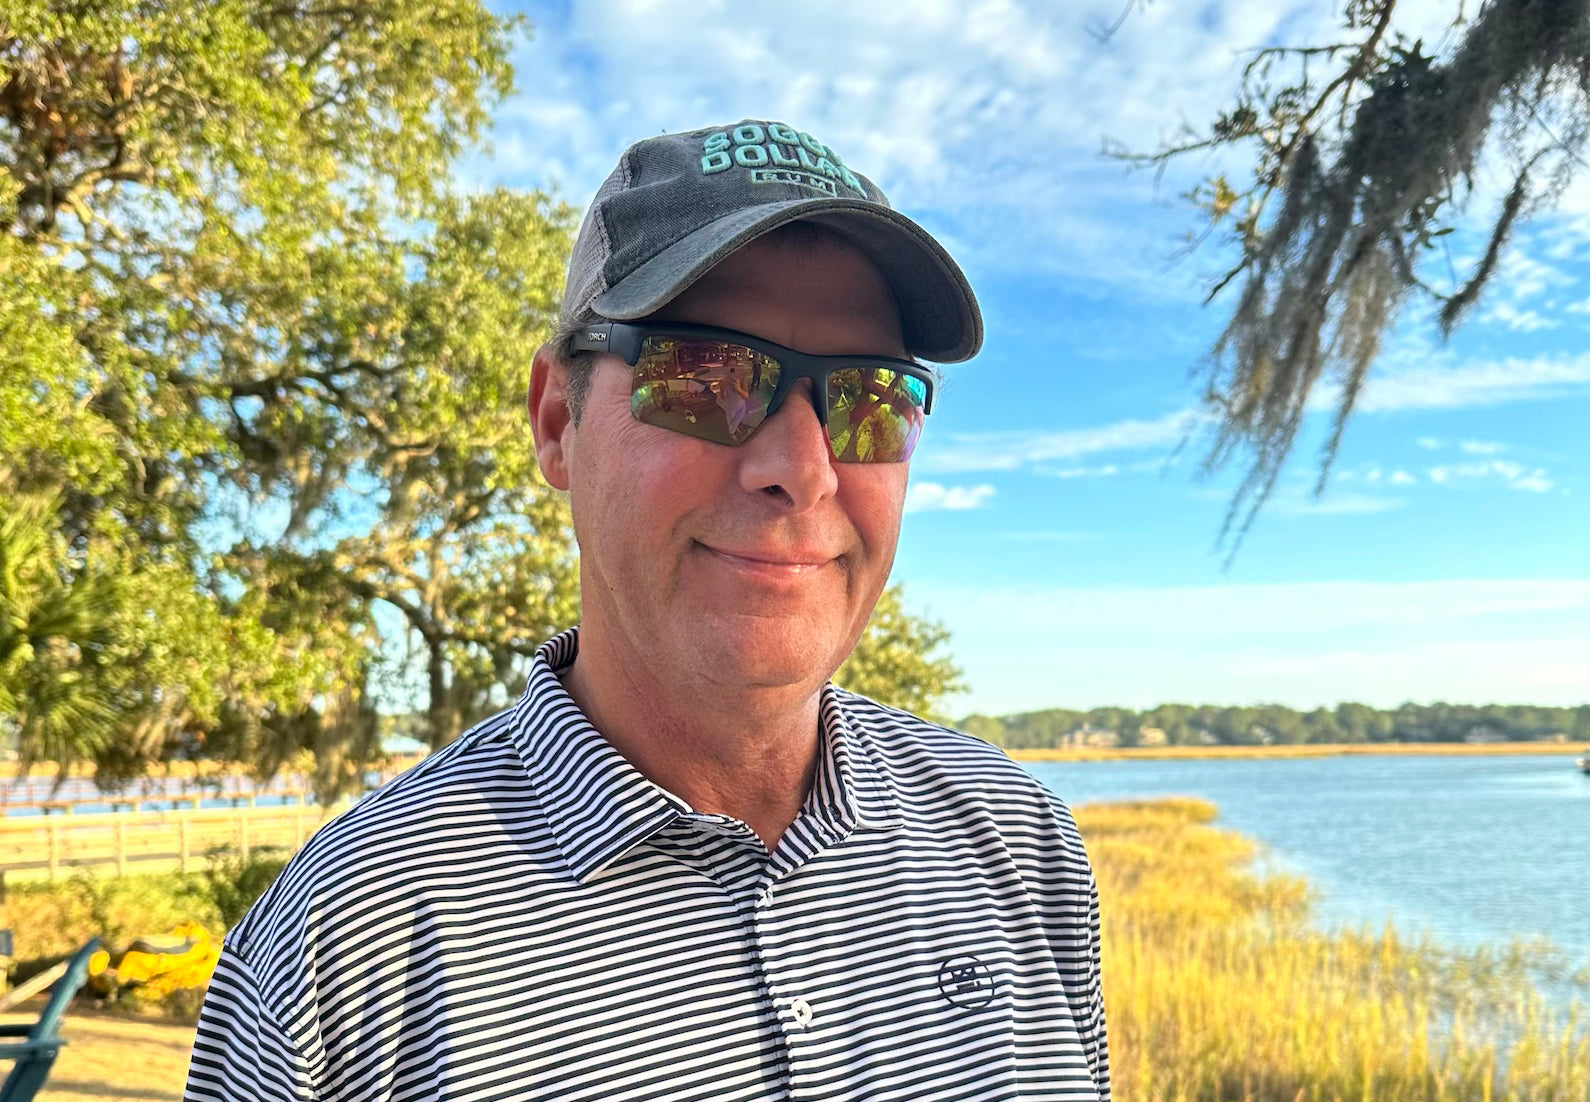 Our friend Larry wearing the classic Daniel Polo in Regal, offering a timeless combination of white and navy stripes. A classic golf polo.